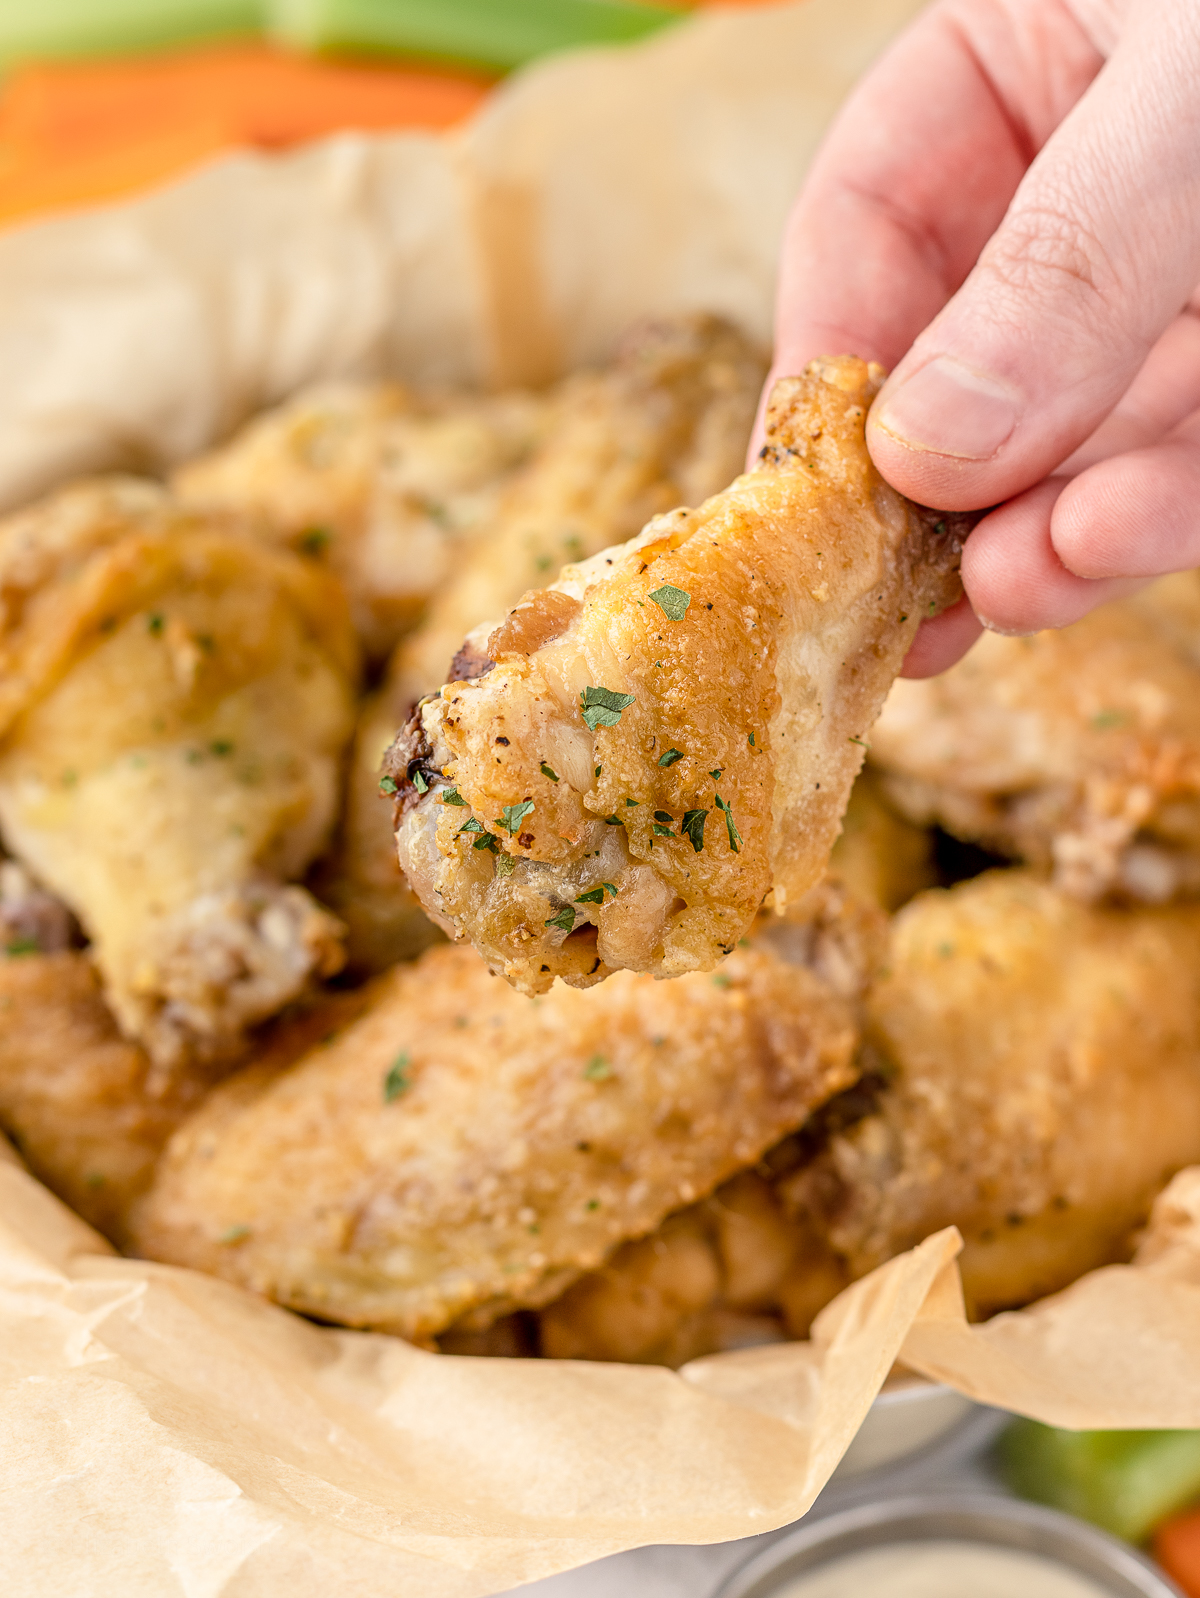 Hand holding chicken wing and ready to dip in sauce.